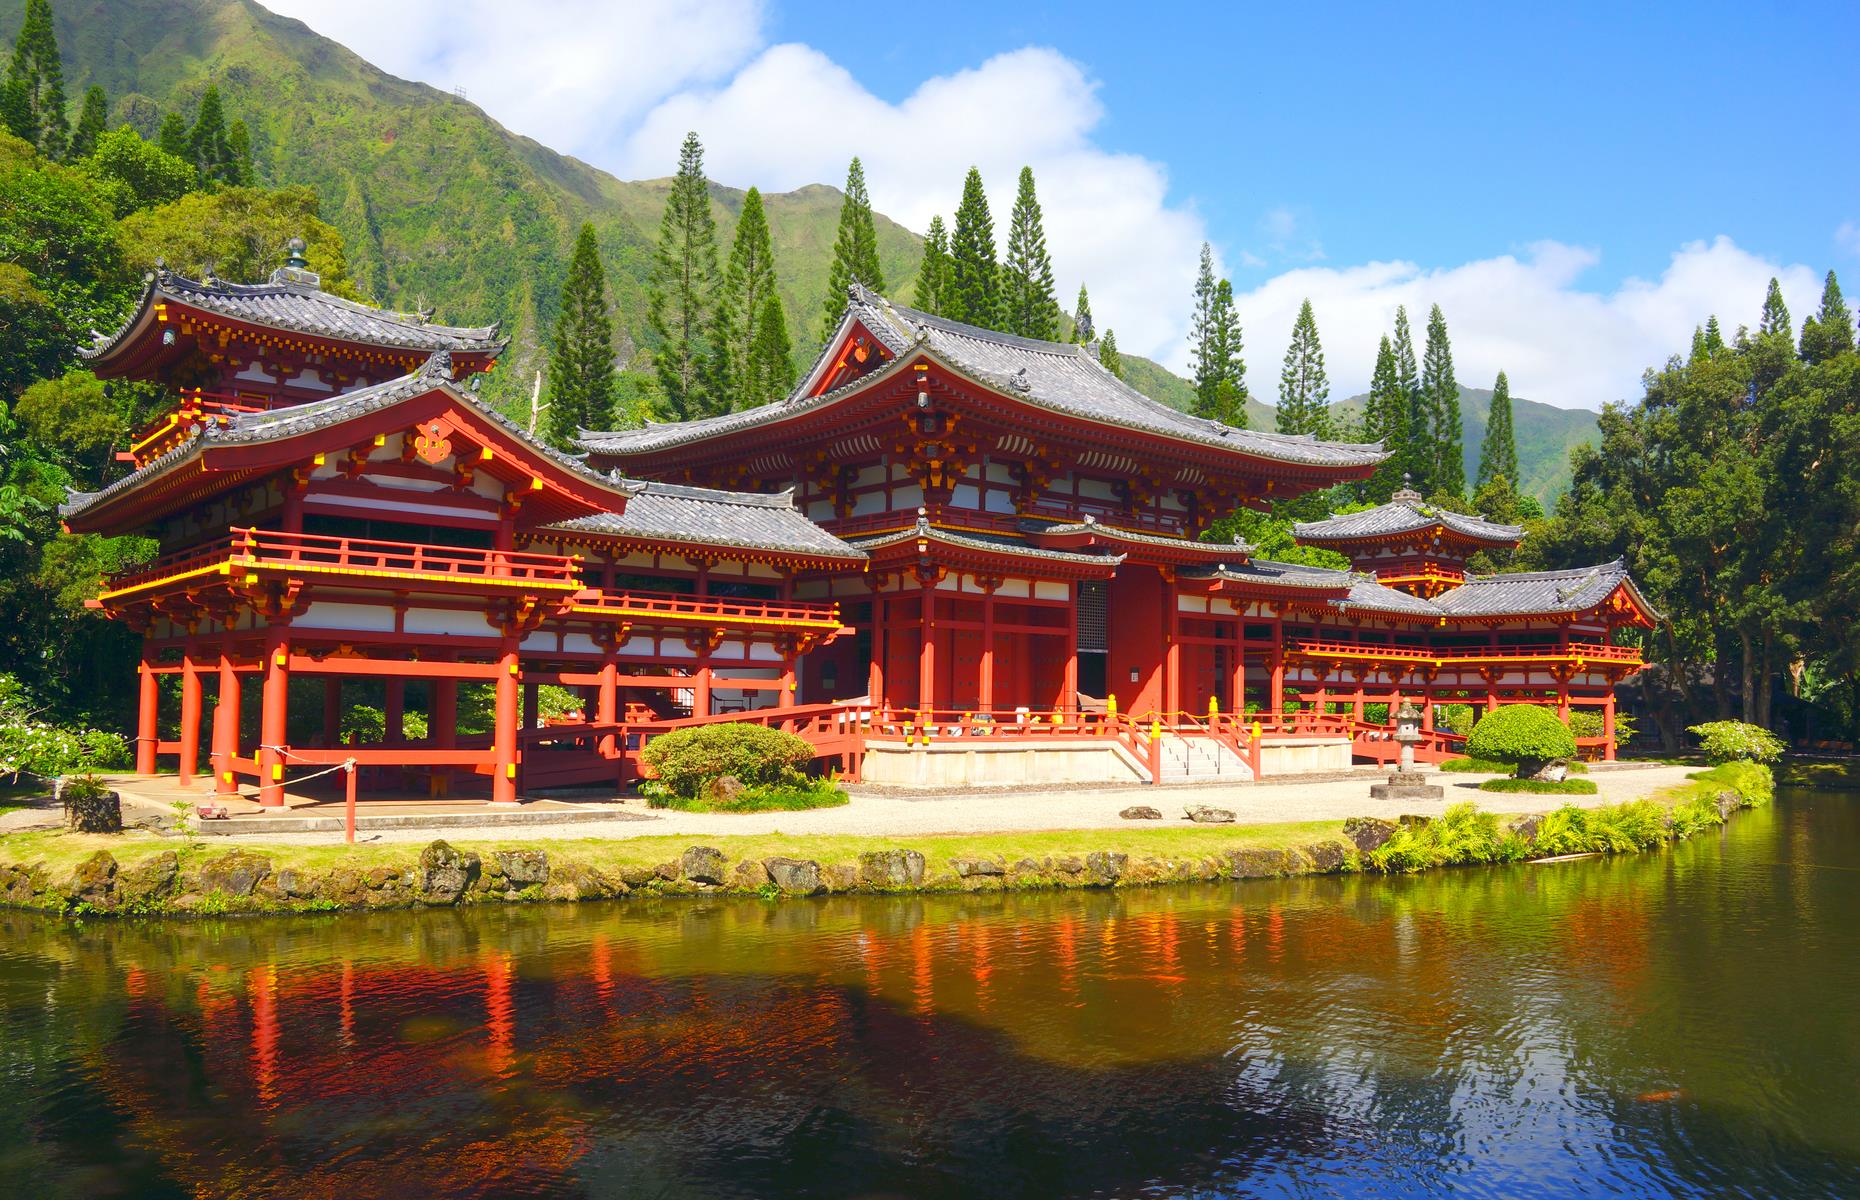 You might not expect to find a full-scale replica of a Japanese temple in Hawaii – but make a beeline for Oahu's eastern Windward Coast and you'll discover exactly that. The Byodo-In Temple is set within the Valley of the Temples Memorial Park, an important Hawaiian burial area, and is a carbon copy of its namesake in Uji, Japan. You can wander the landscaped grounds, with its koi-filled pond, and gaze up at an 18-foot (5m) buddha within the temple itself.